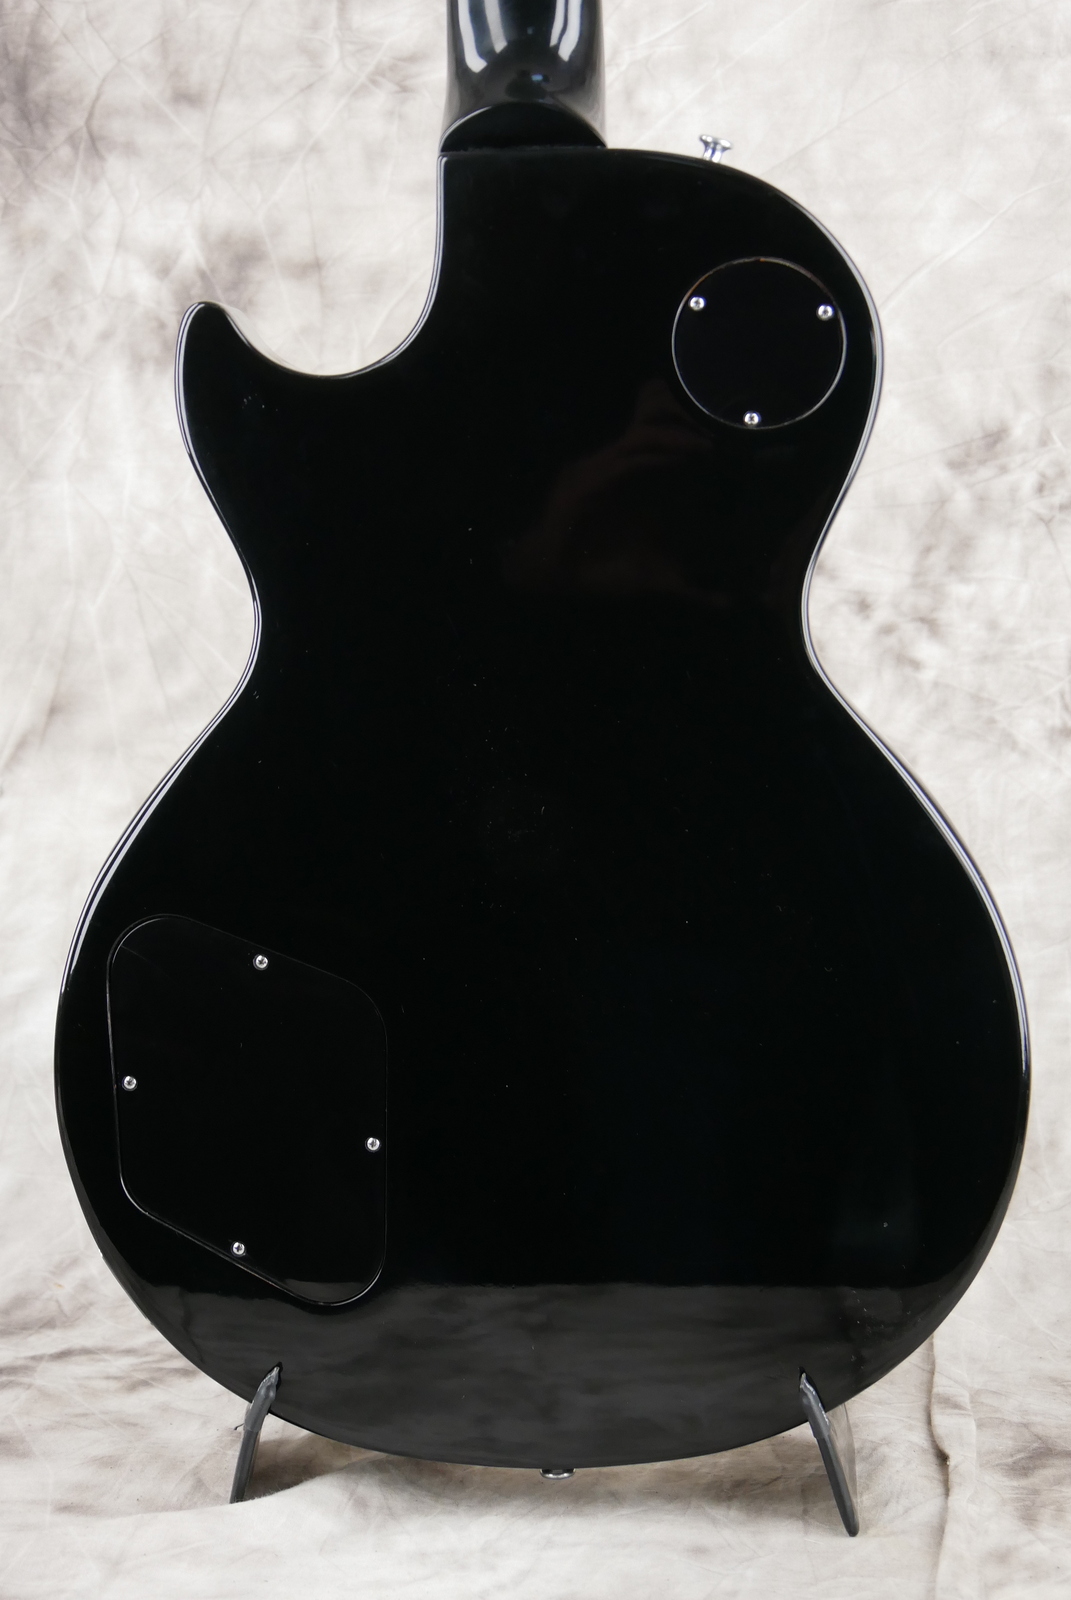 Gibson_Les_Paul_Deluxe_limited_edtion_black_2000-004.JPG